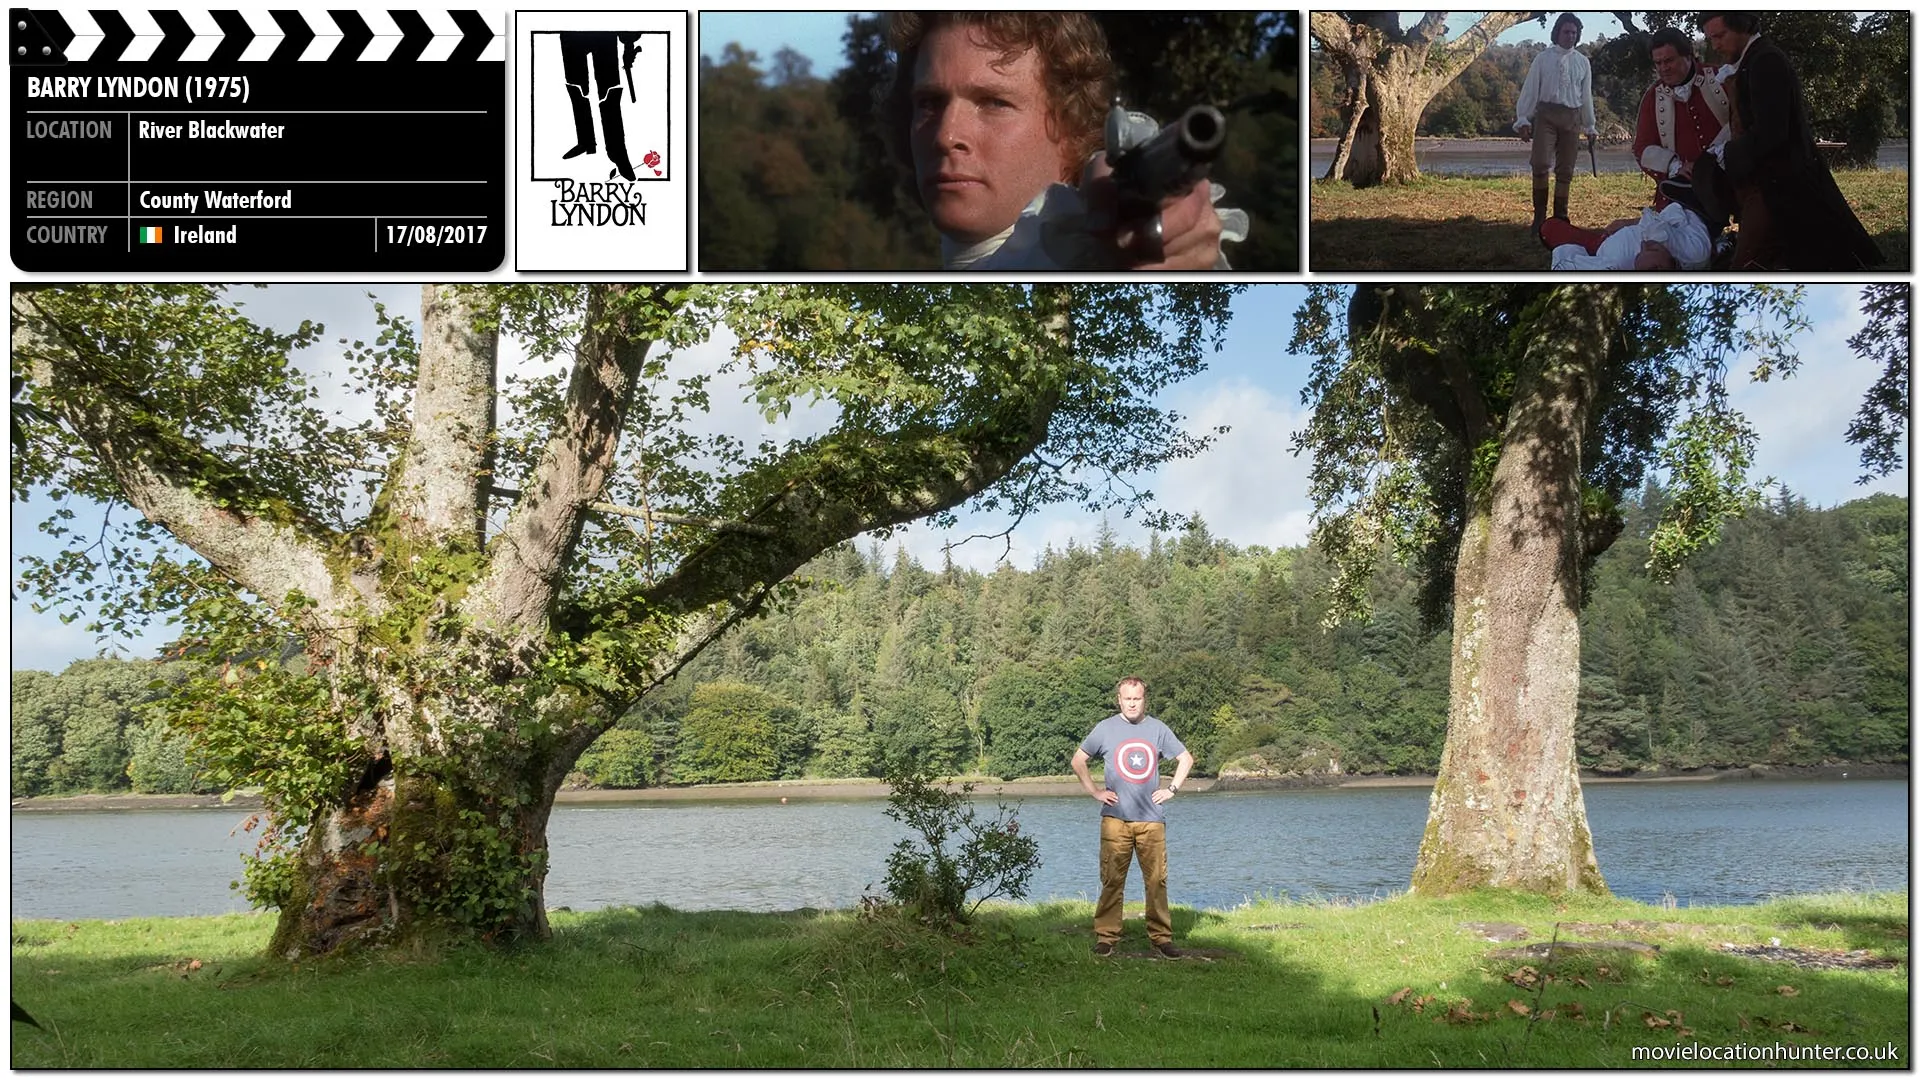 Filming location photo, shot in Ireland, for Barry Lyndon (1975). Scene description: Barry (Ryan O'Neal) and Captain John Quin (Leonard Rossiter) fire pistols at ten paces and Quin falls. Believing that he has killed Quin and will be arrested by the British for murder, Barry flees.